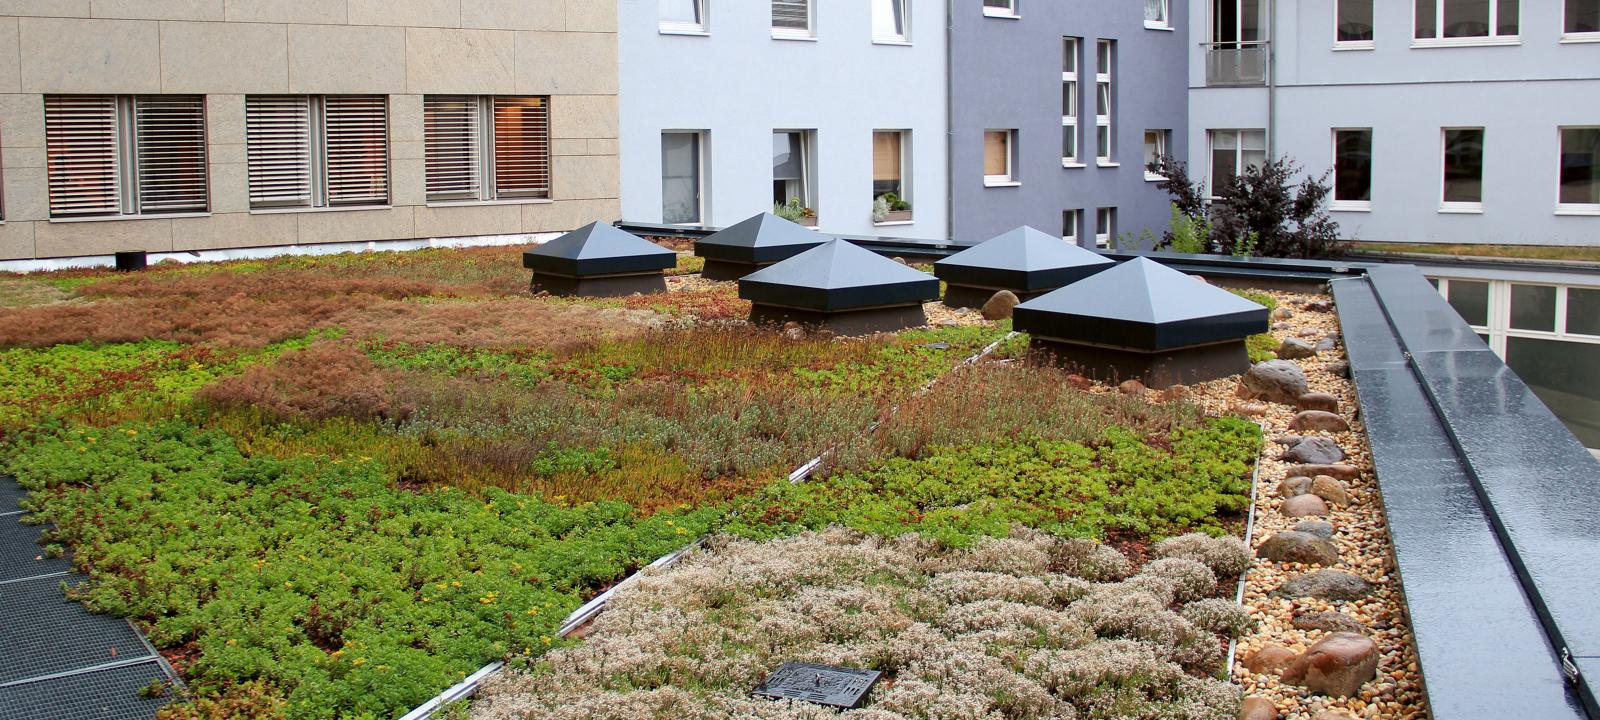 Extensive green roof during rainfall